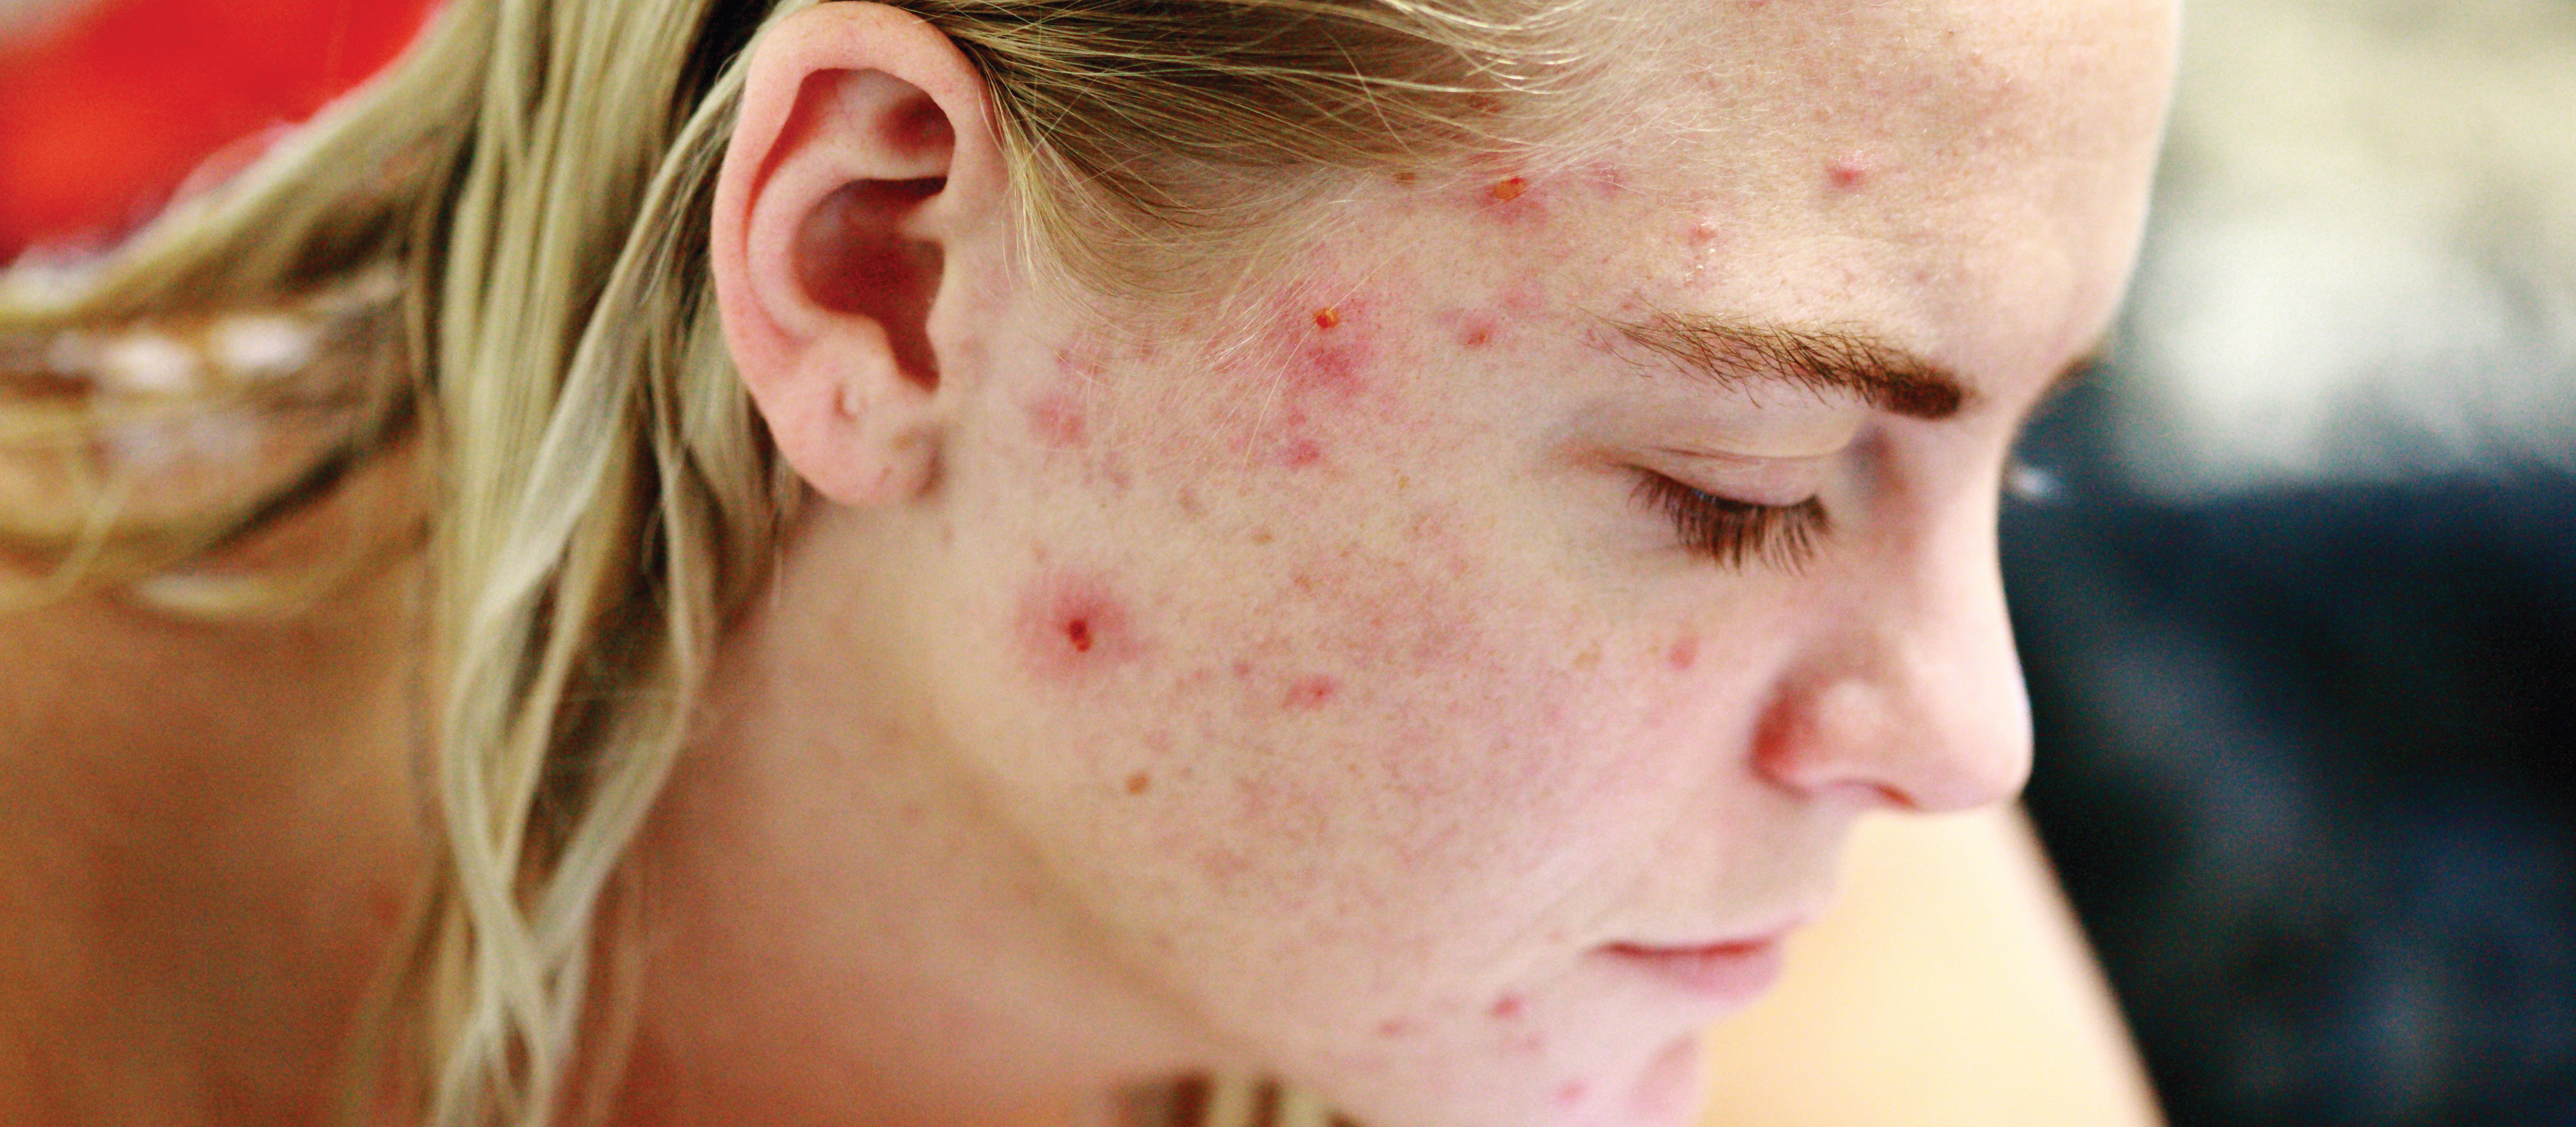 young person with acne